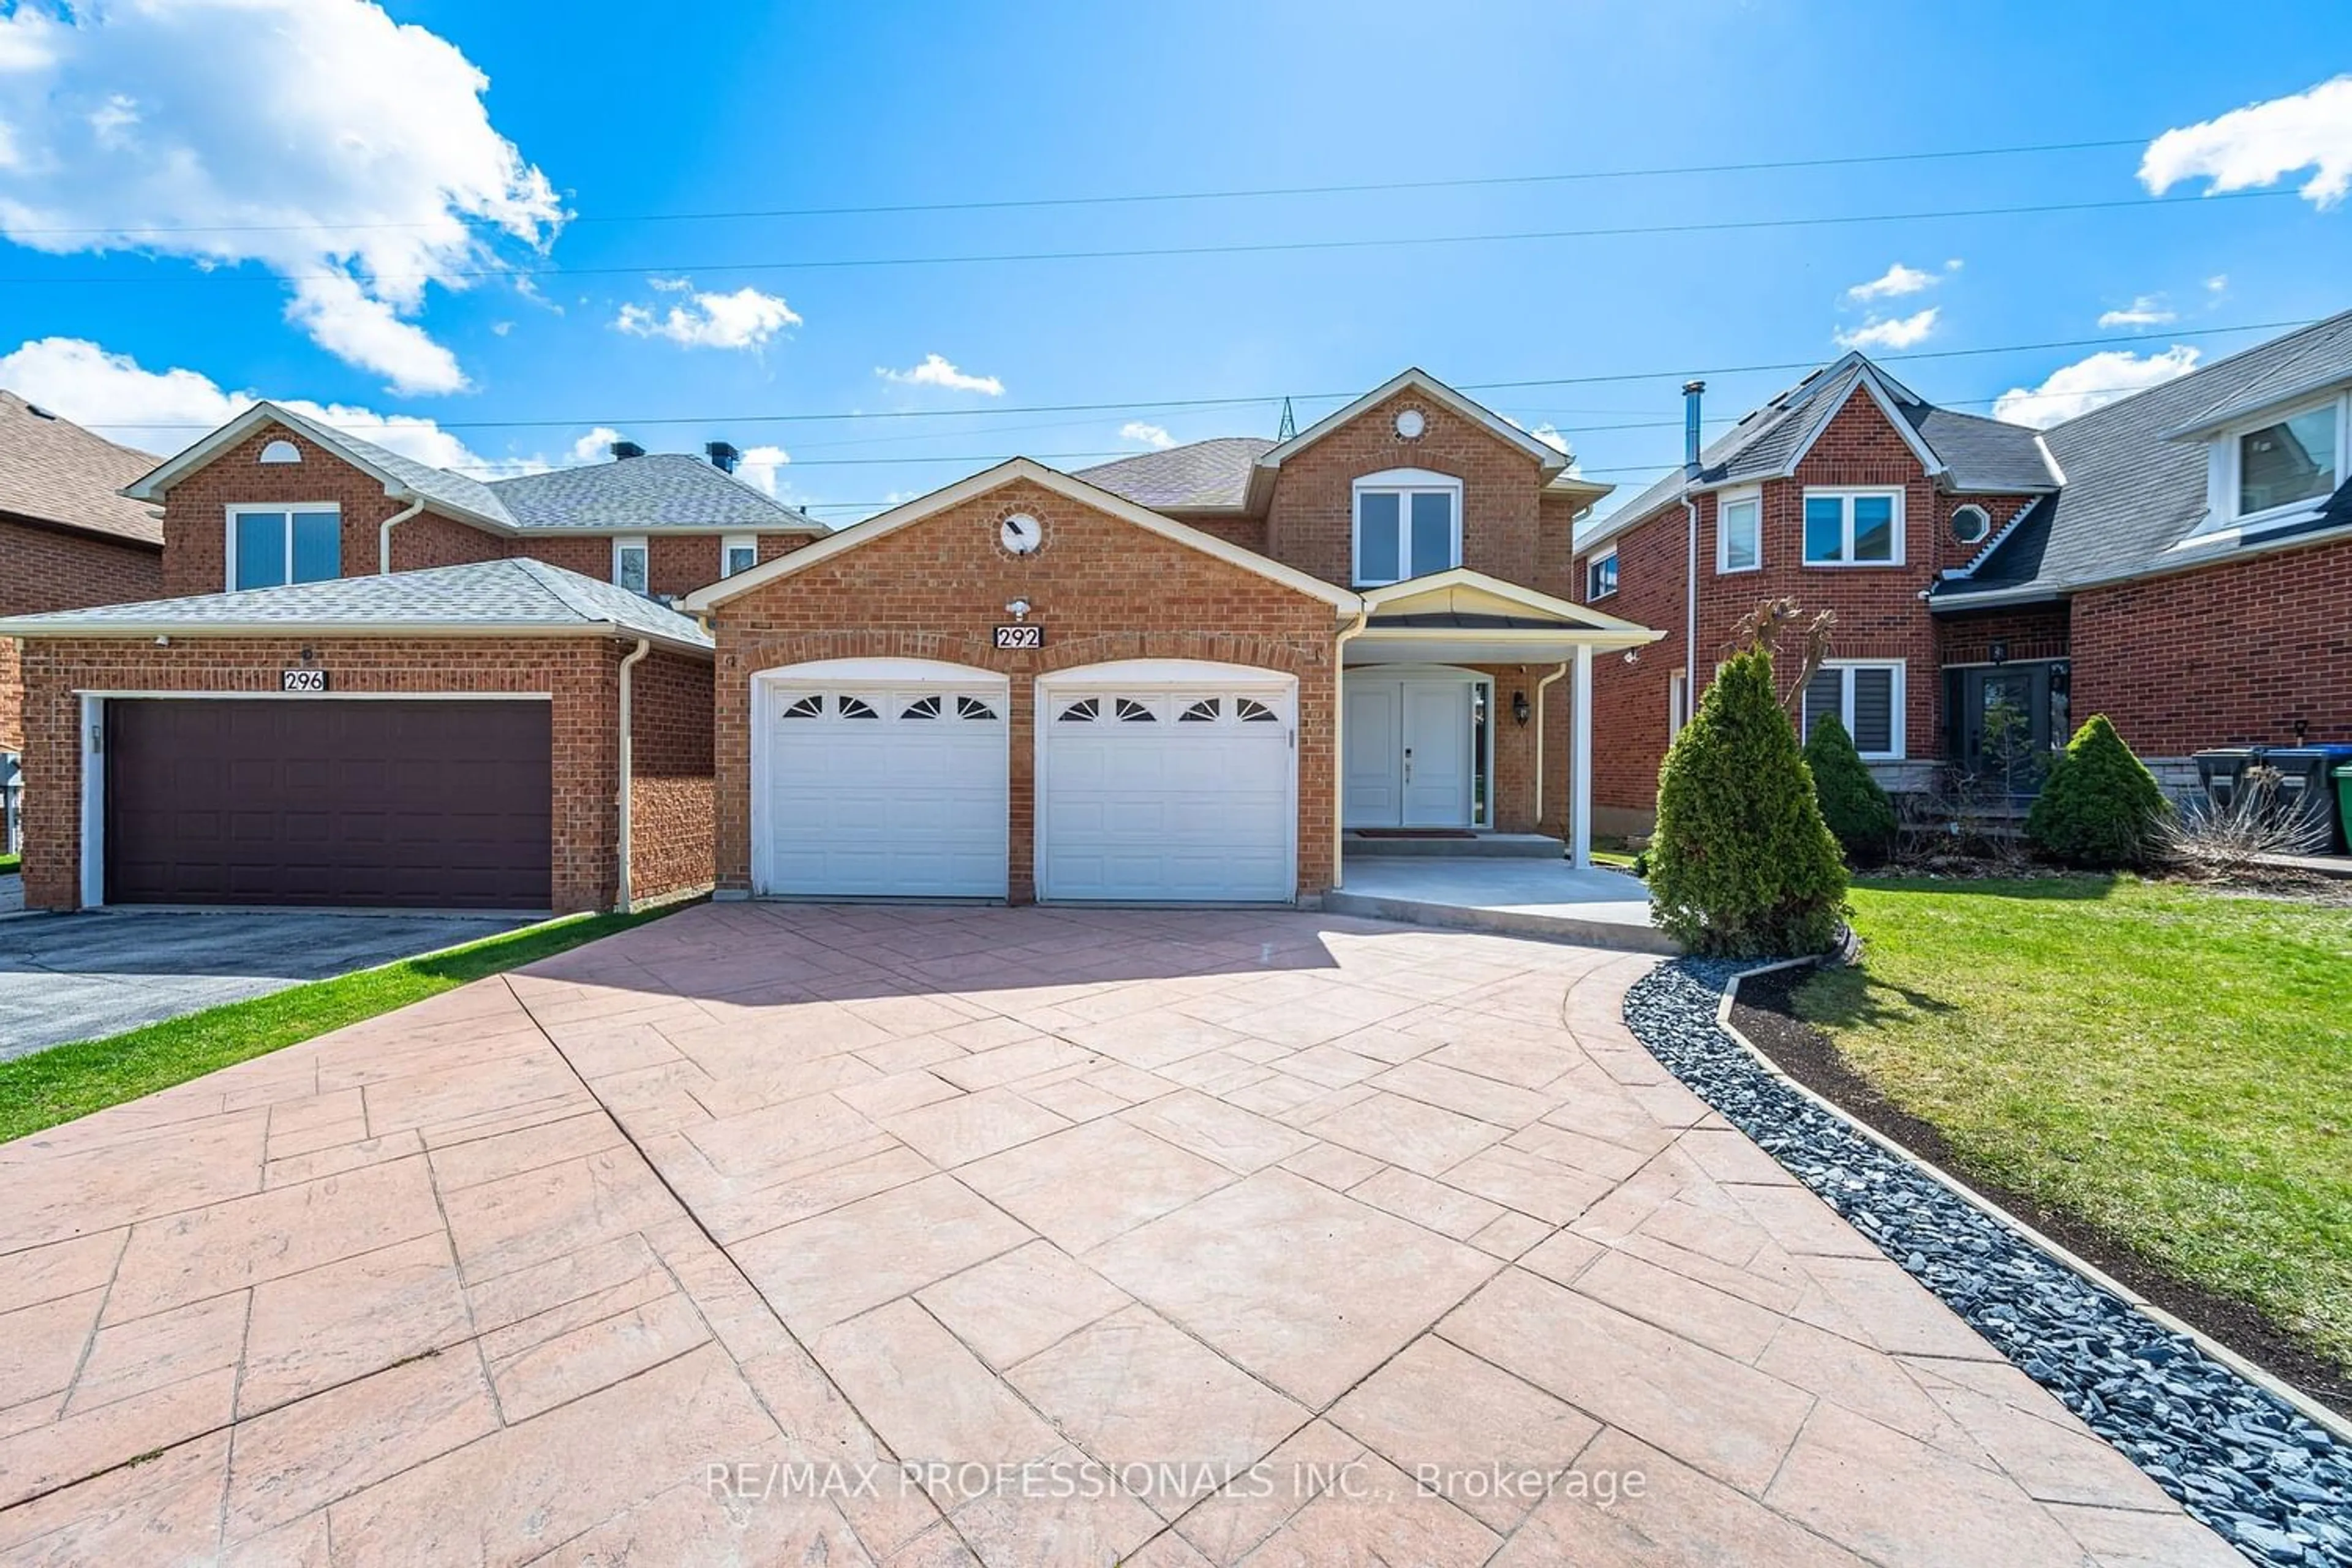 Home with brick exterior material for 292 Laurentian Ave, Mississauga Ontario L4Z 2S2